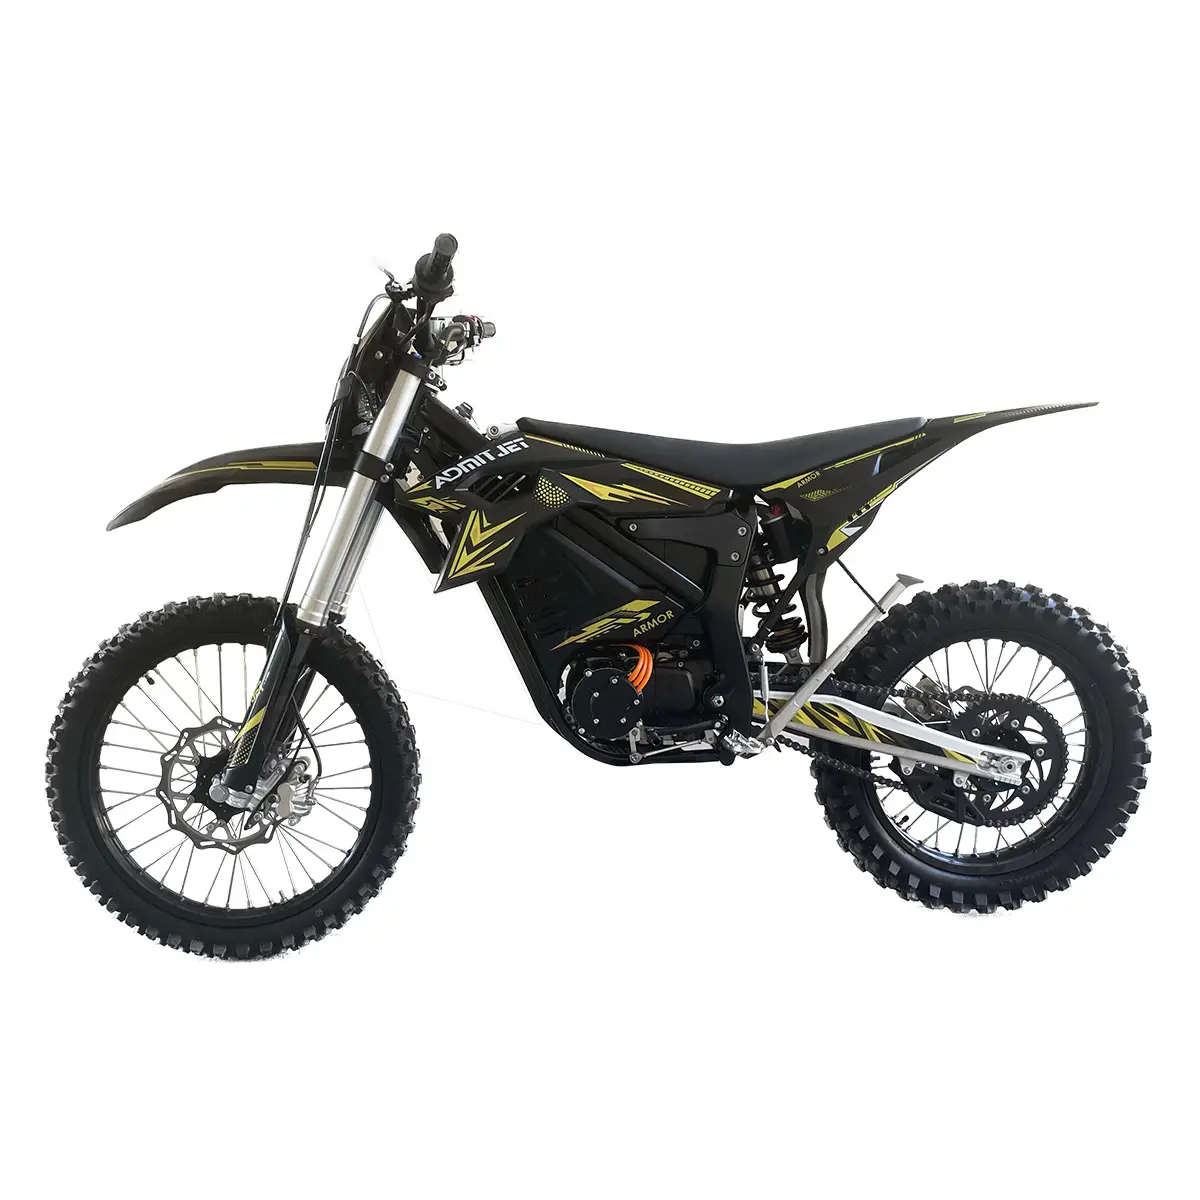 Advance 26Inch Frame 72 Volt 20KW Motor 80 - 85 MPH Top Speed Adult Mountain Electric Dirt Bike